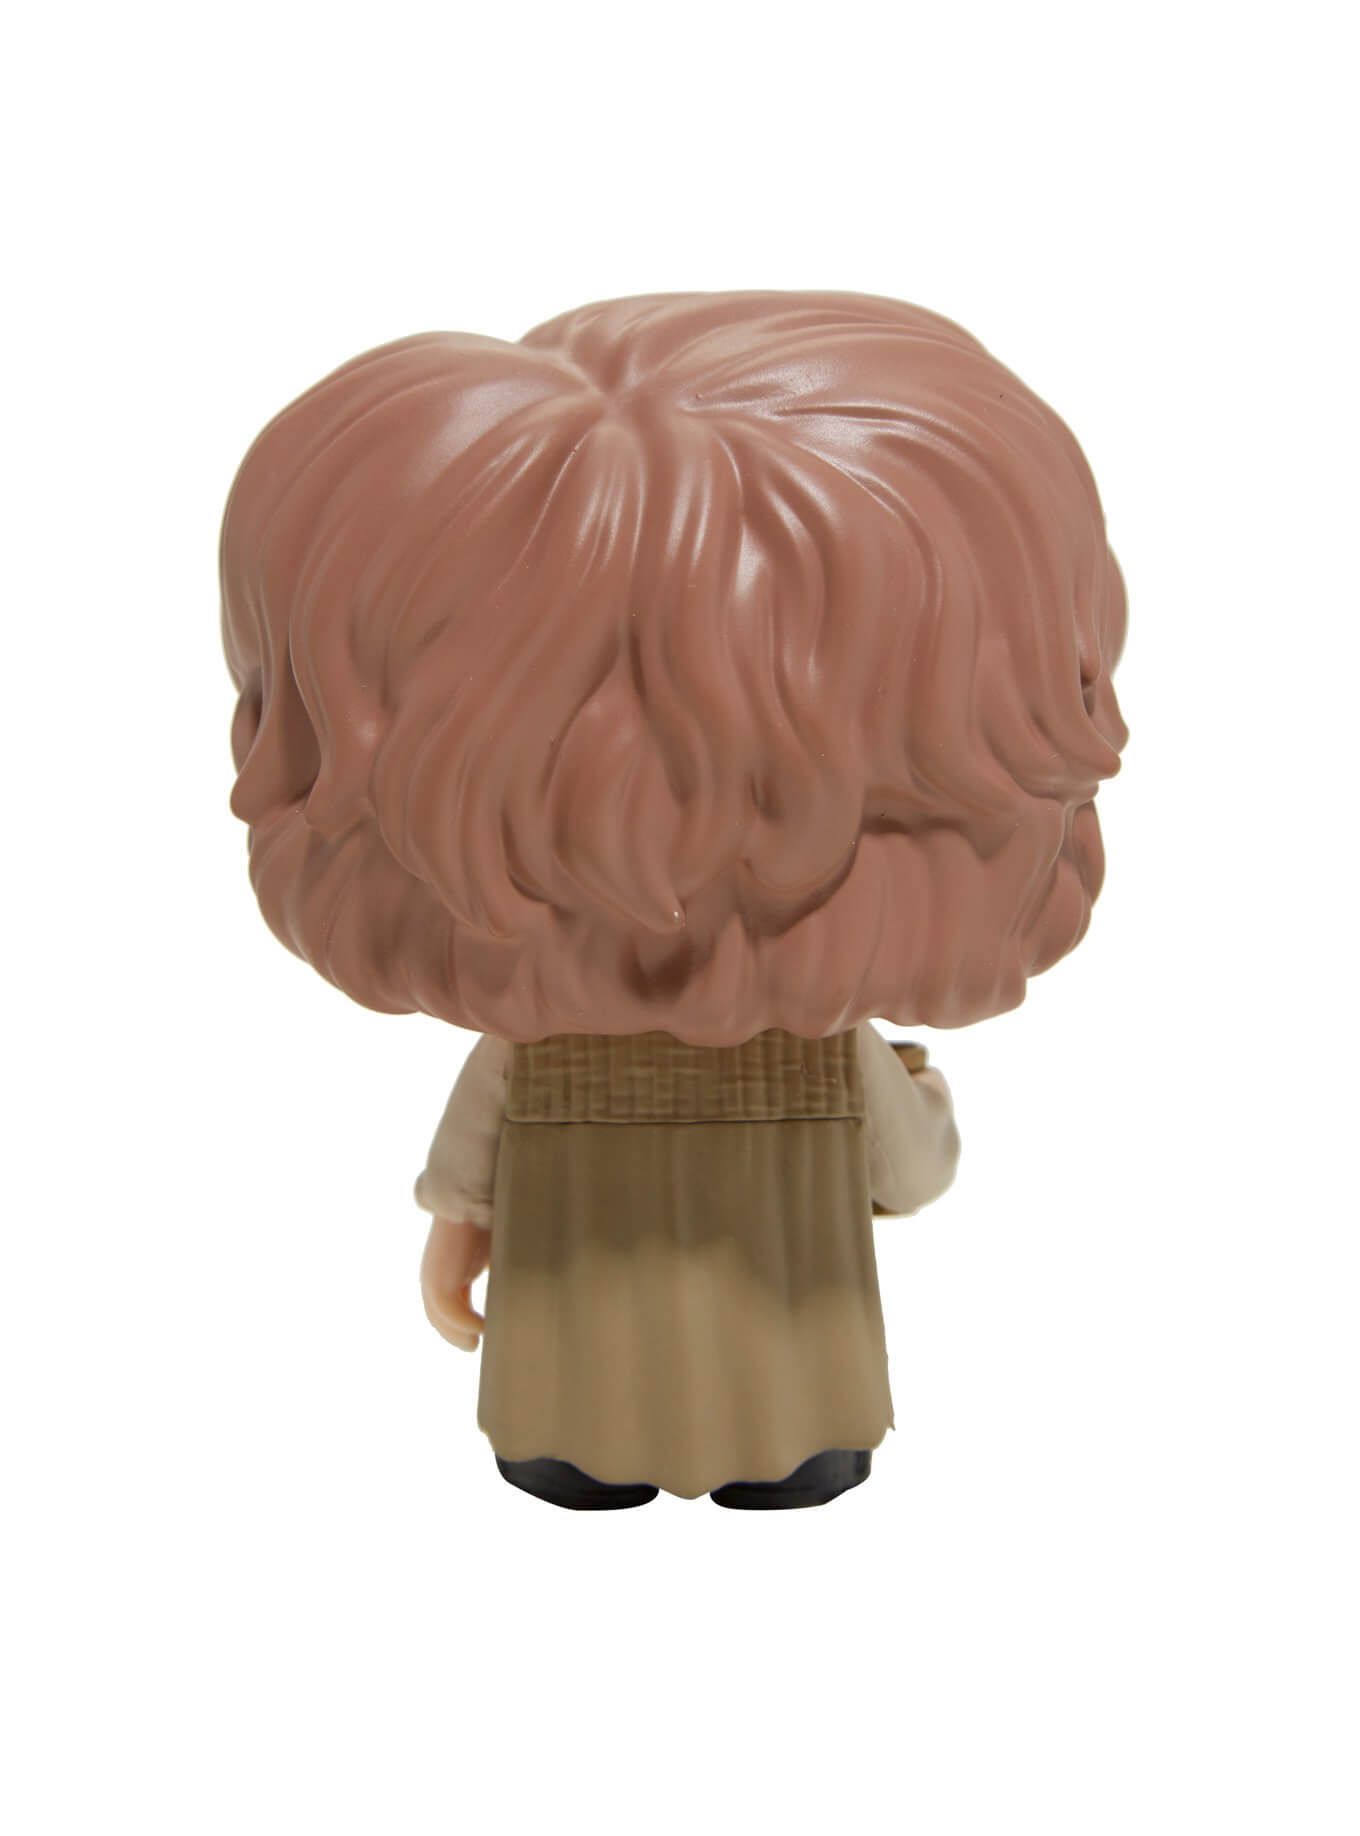 Tyrion Lannister #50 - Game of Thrones - Funko Pop!